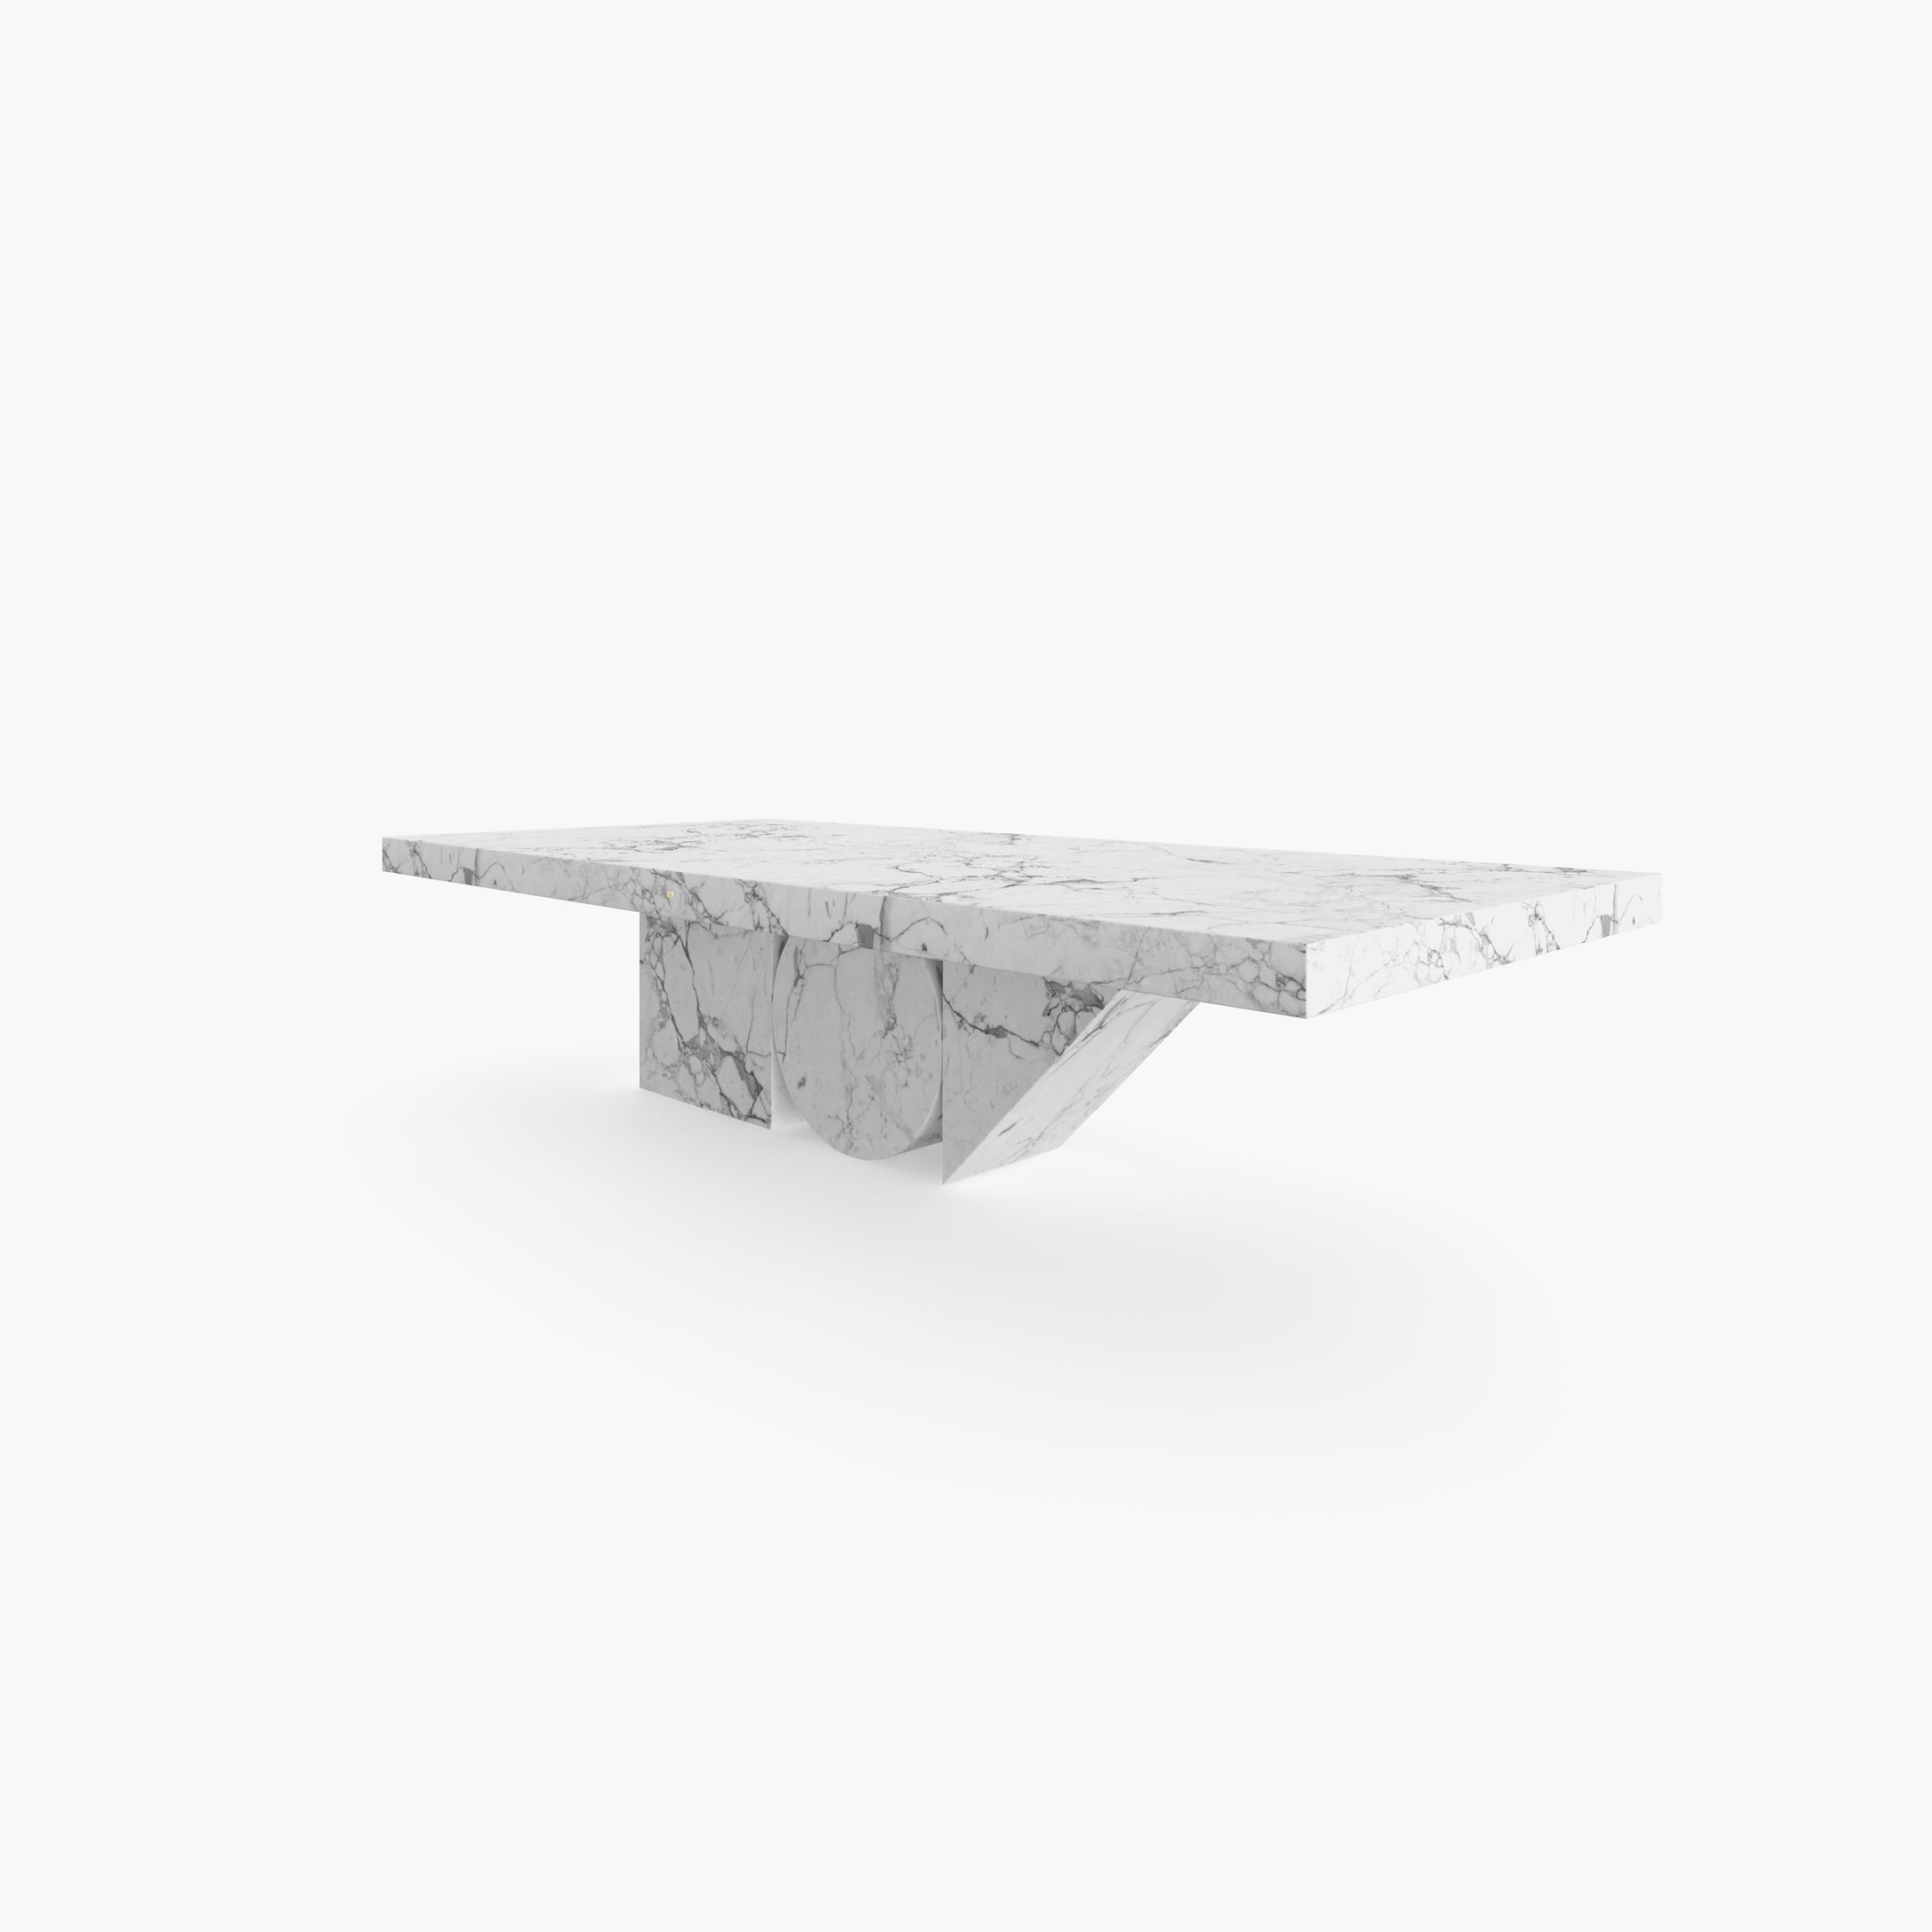 Dining Table Cylinder cuboid prism White Arabescato Marble amazing Dining Room designer Dining Tables FS 190 FELIX SCHWAKE